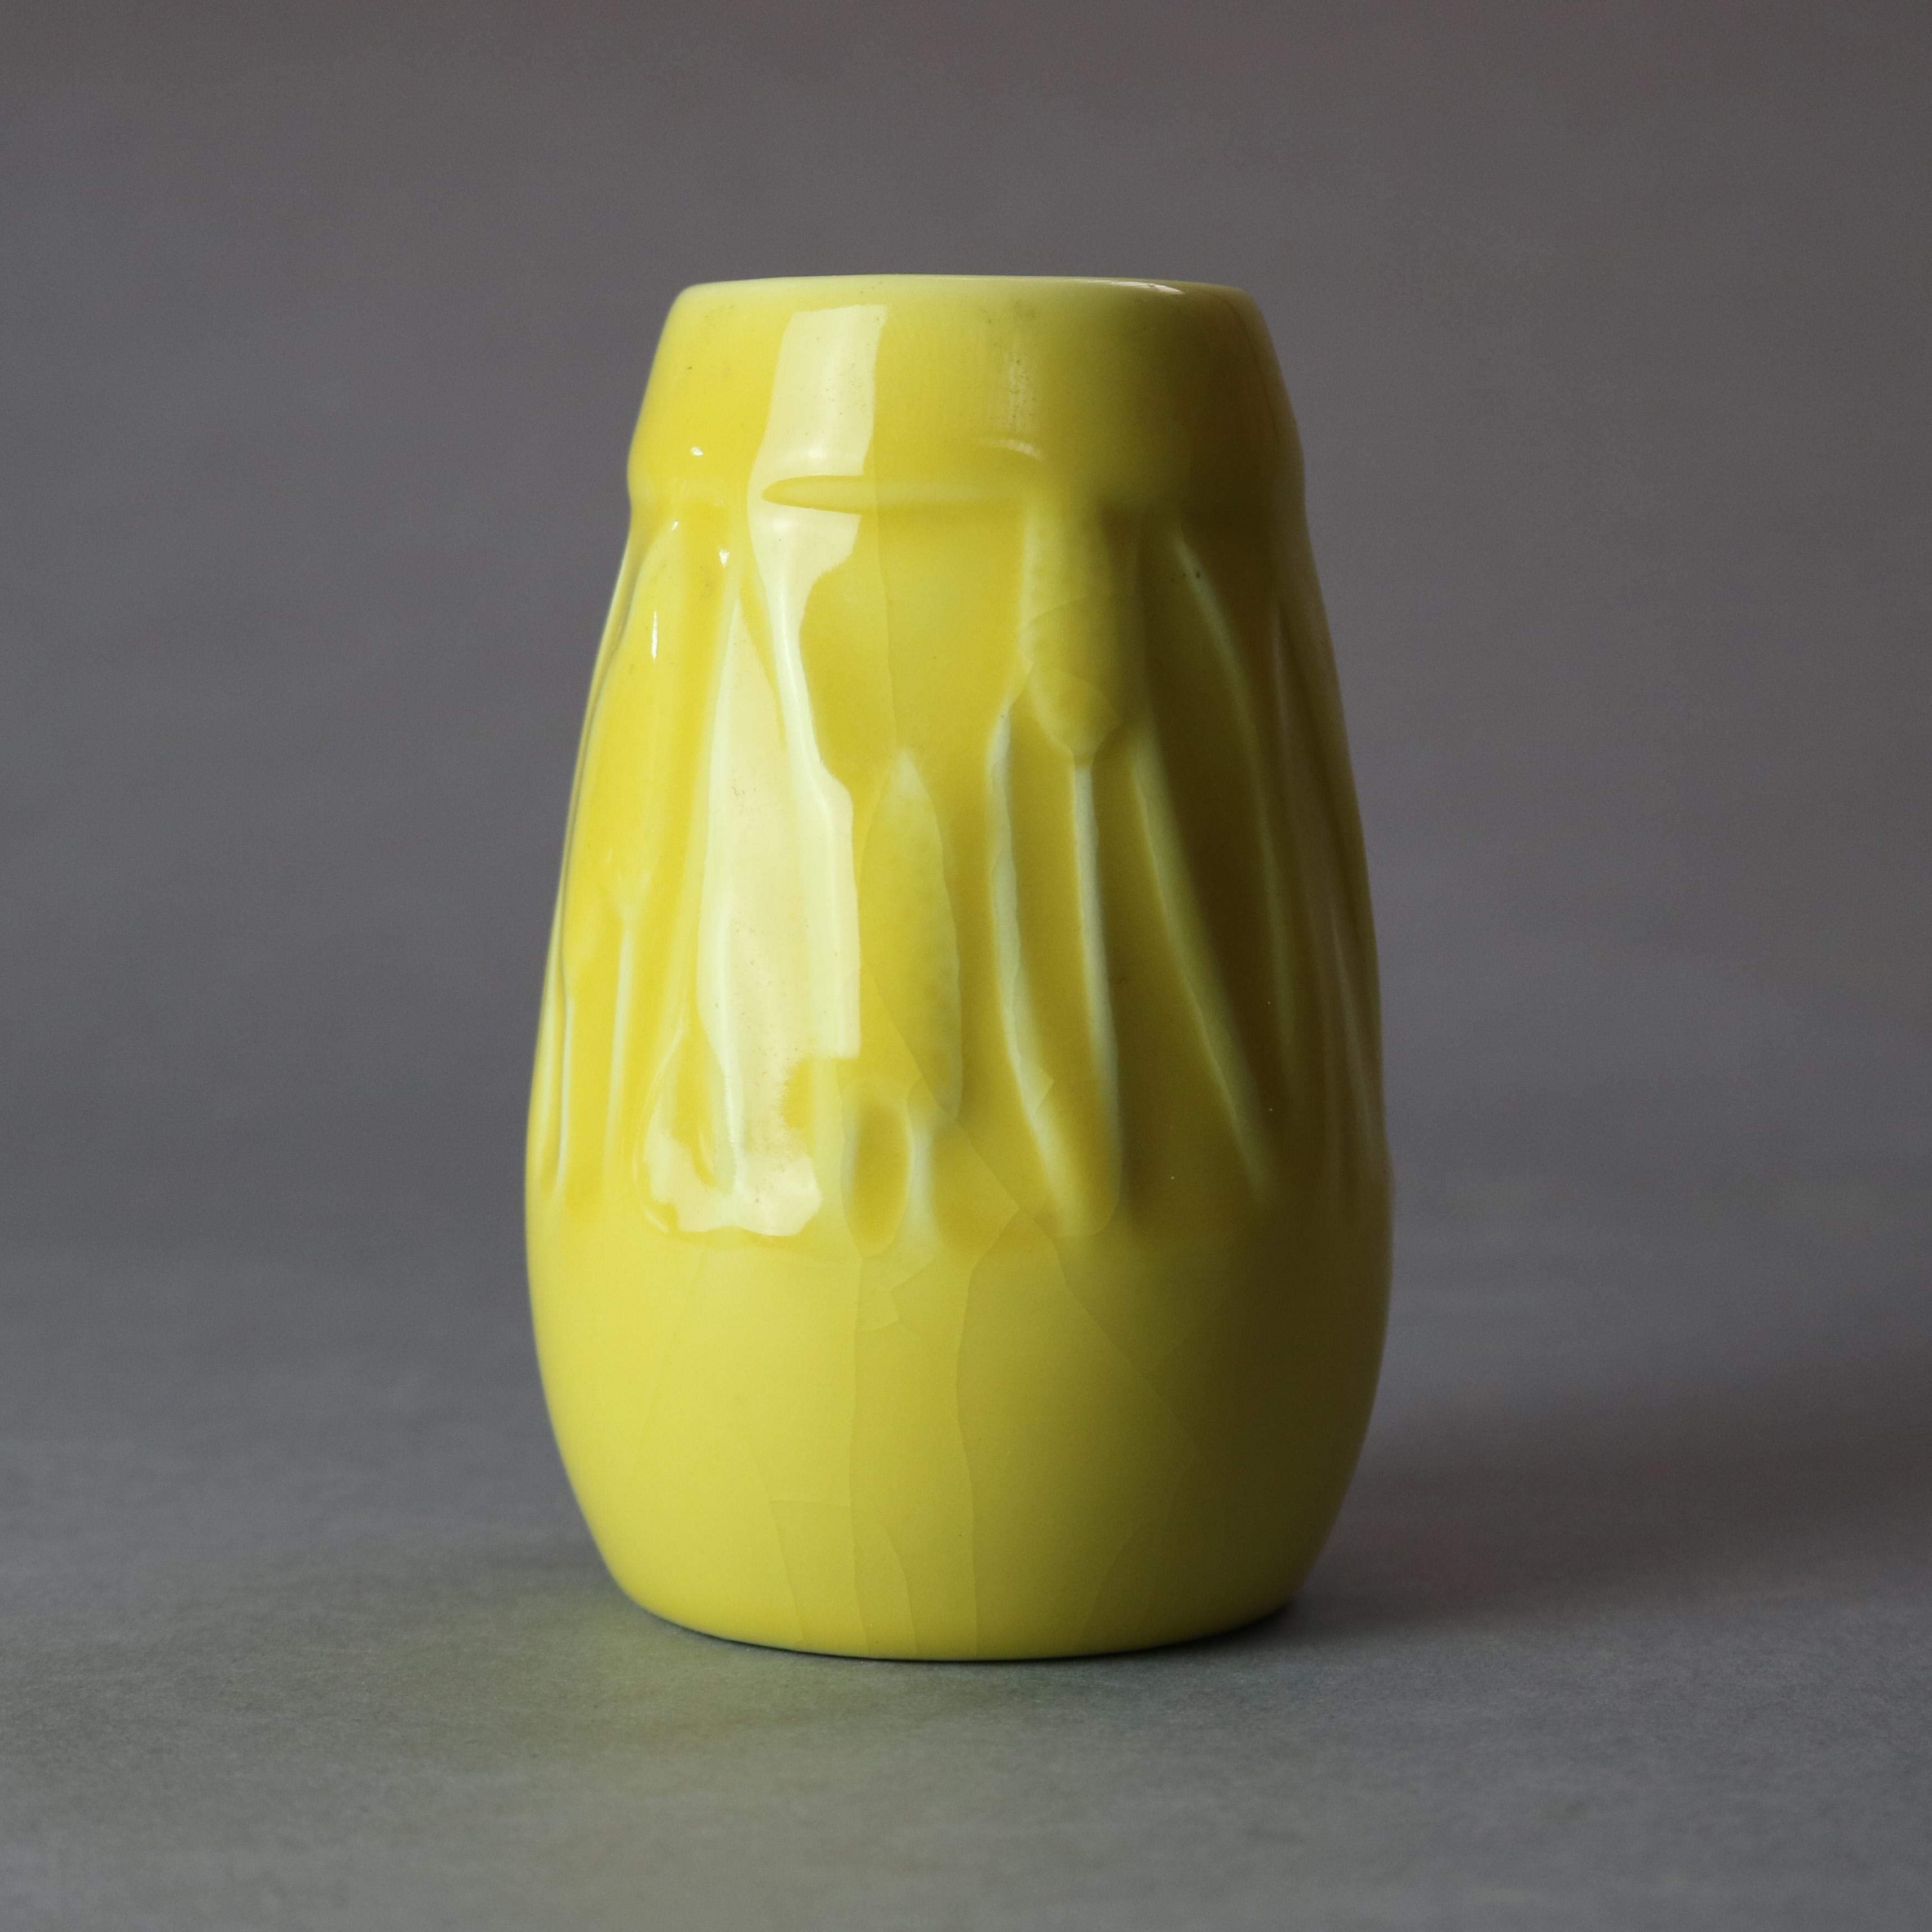 An Arts & Crafts vase by Rookwood offers art pottery construction in yellow high gloss glaze with a wide band of incised stylized cattails, signed on base as photographed, circa 1930

Measures: 5